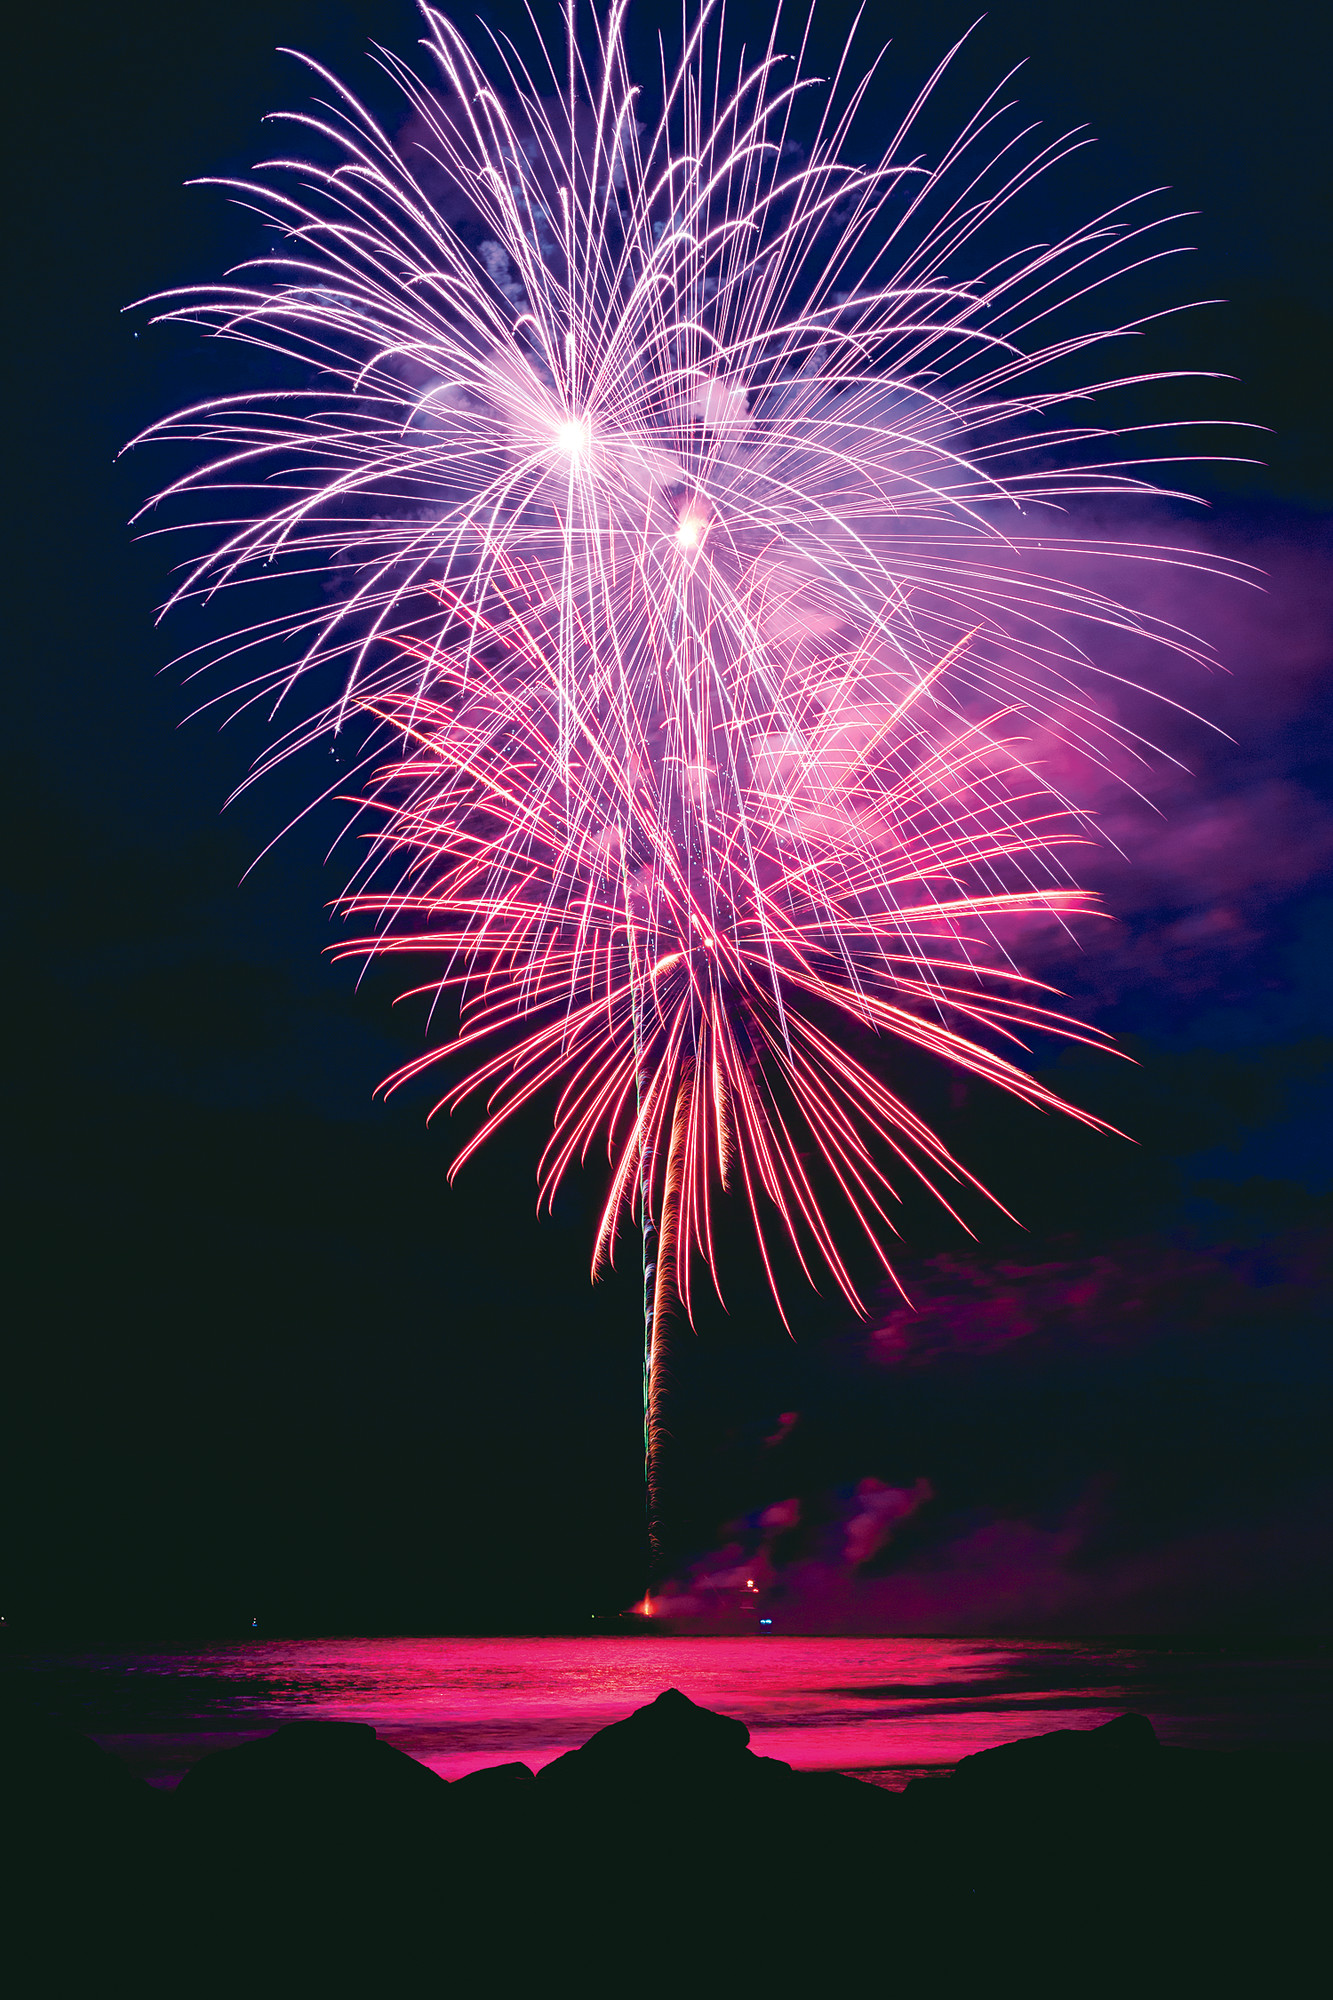 The City of Long Beach will hold its annual fireworks show on Friday, July 8 at 8 p.m.